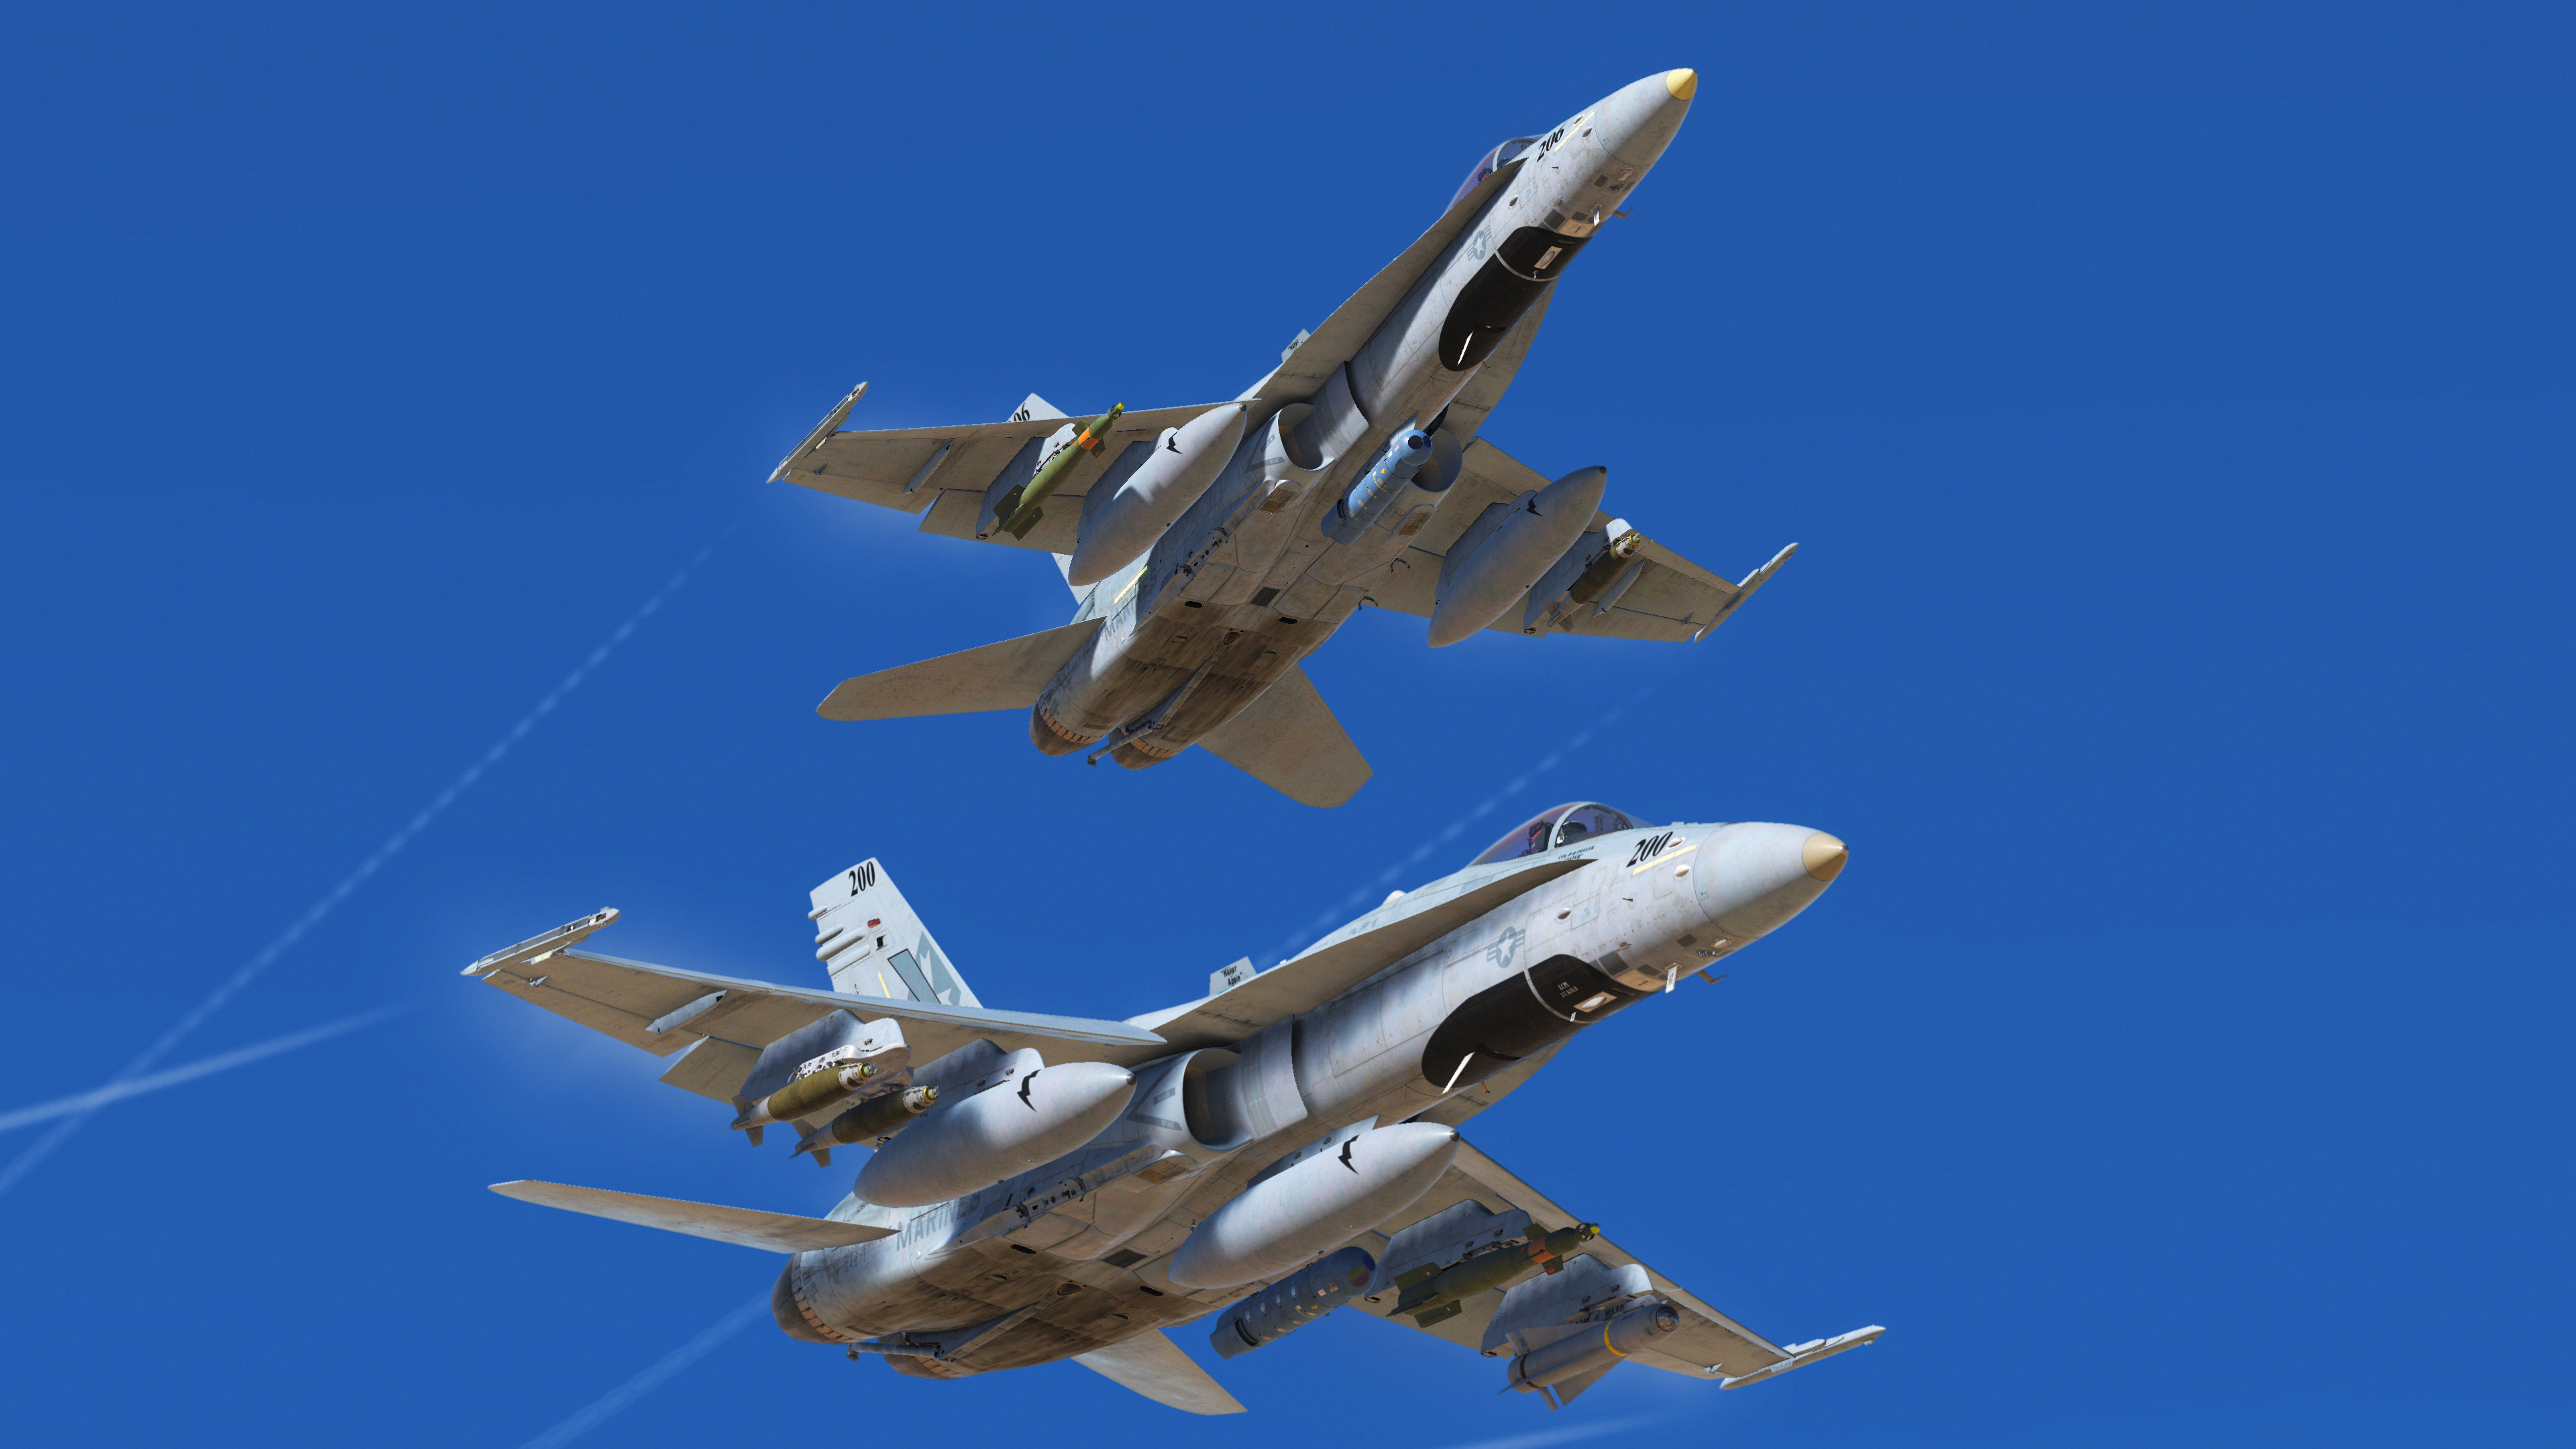 VMFA-251 Thunderbolts Skin Pack! [Updated]